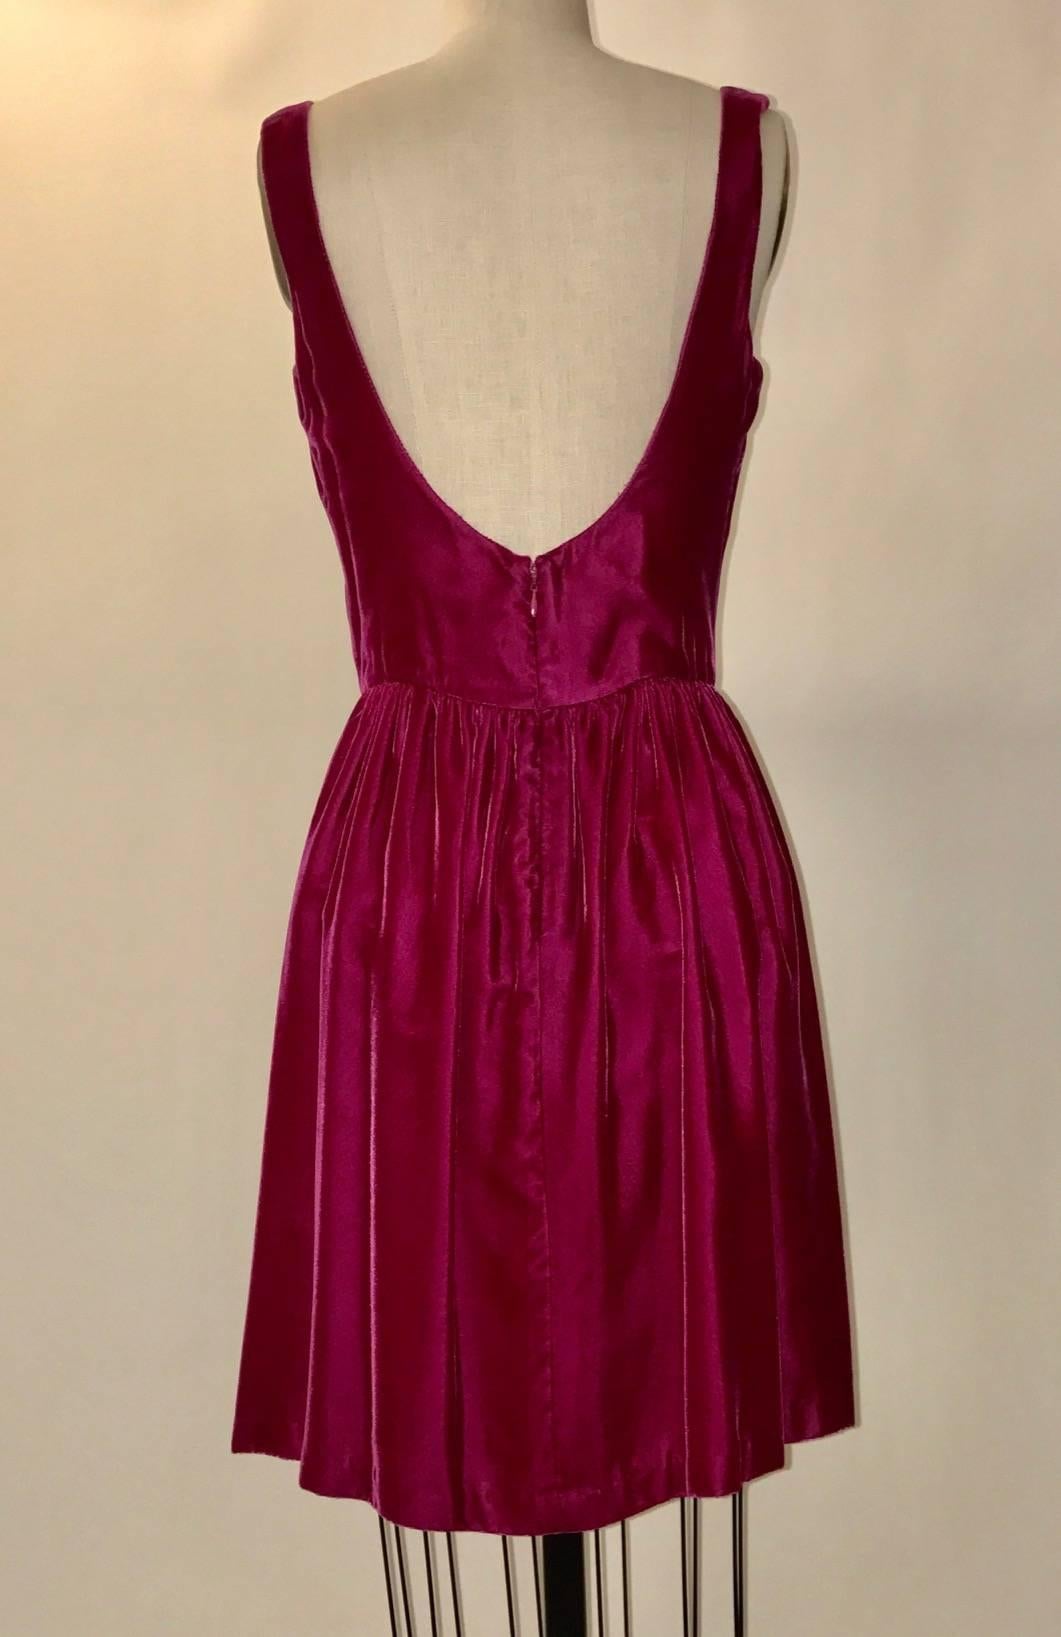 Raspberry velvet vintage 1980's sleeveless dress with flared skirt from Stephen Sprouse's 'Sprouse' line. Cut low at back. Back zip and hook and eye closure.

100% rayon.
Fully lined.

Made in USA.

Labeled size 8, fits more like modern 4/6. See